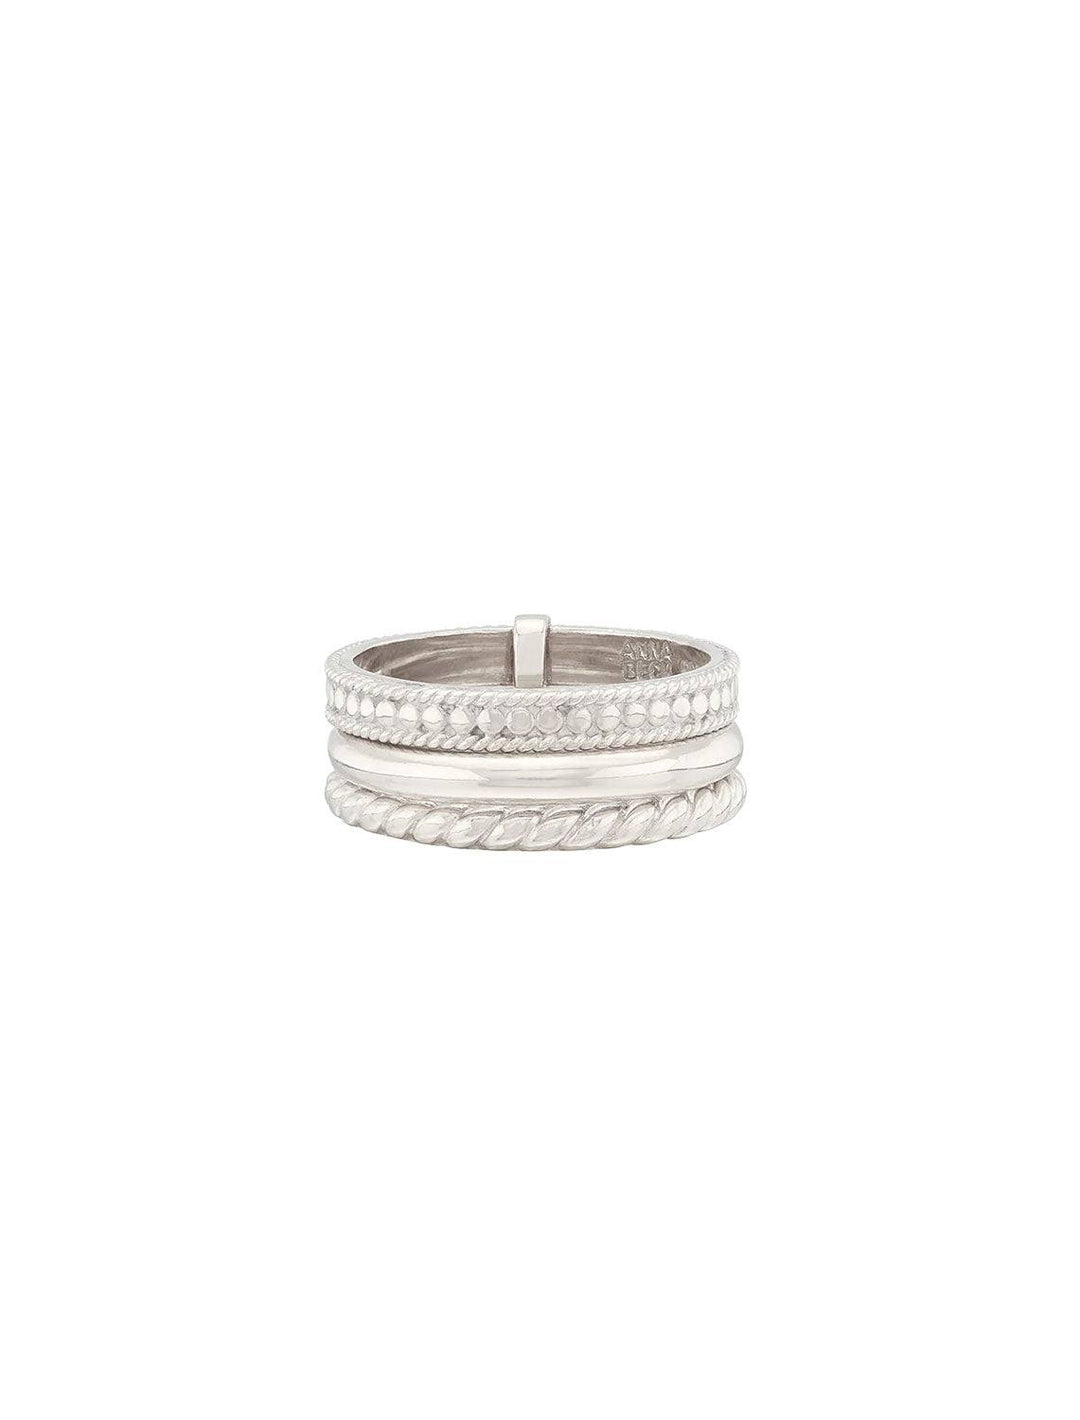 Front view of Anna Beck's classic triple stacking ring.